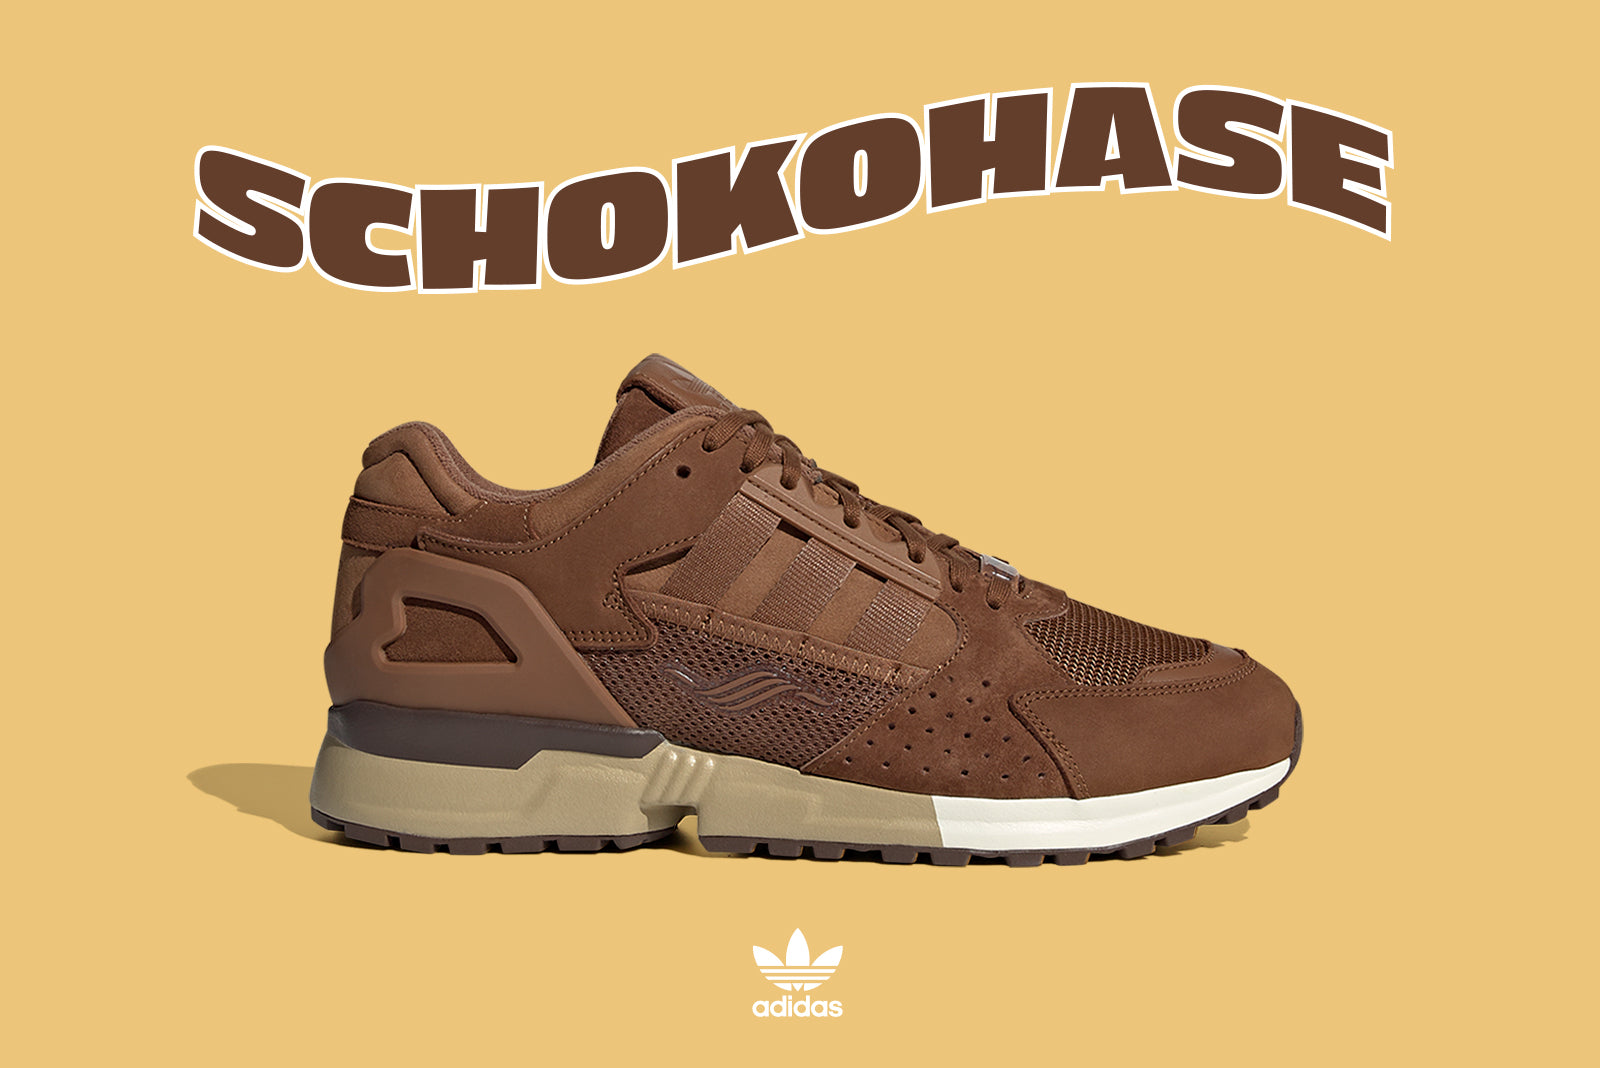 ZX 10, adidas office bags for girls shoes online, 000 "Schokohase" –